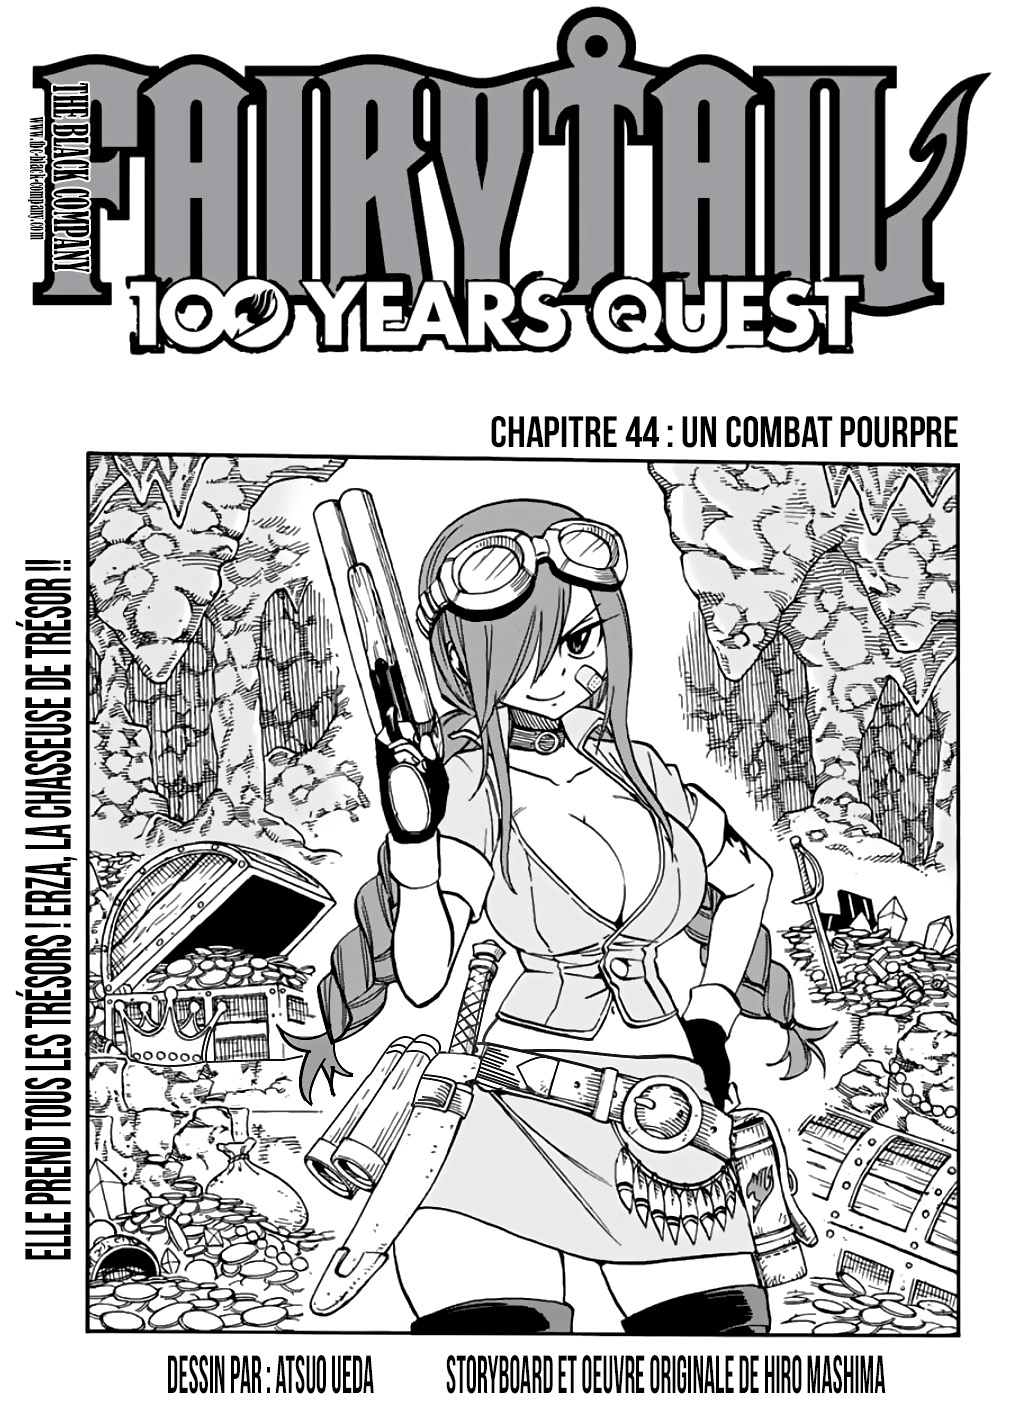 Fairy Tail 100 Years Quest: Chapter chapitre-44 - Page 1